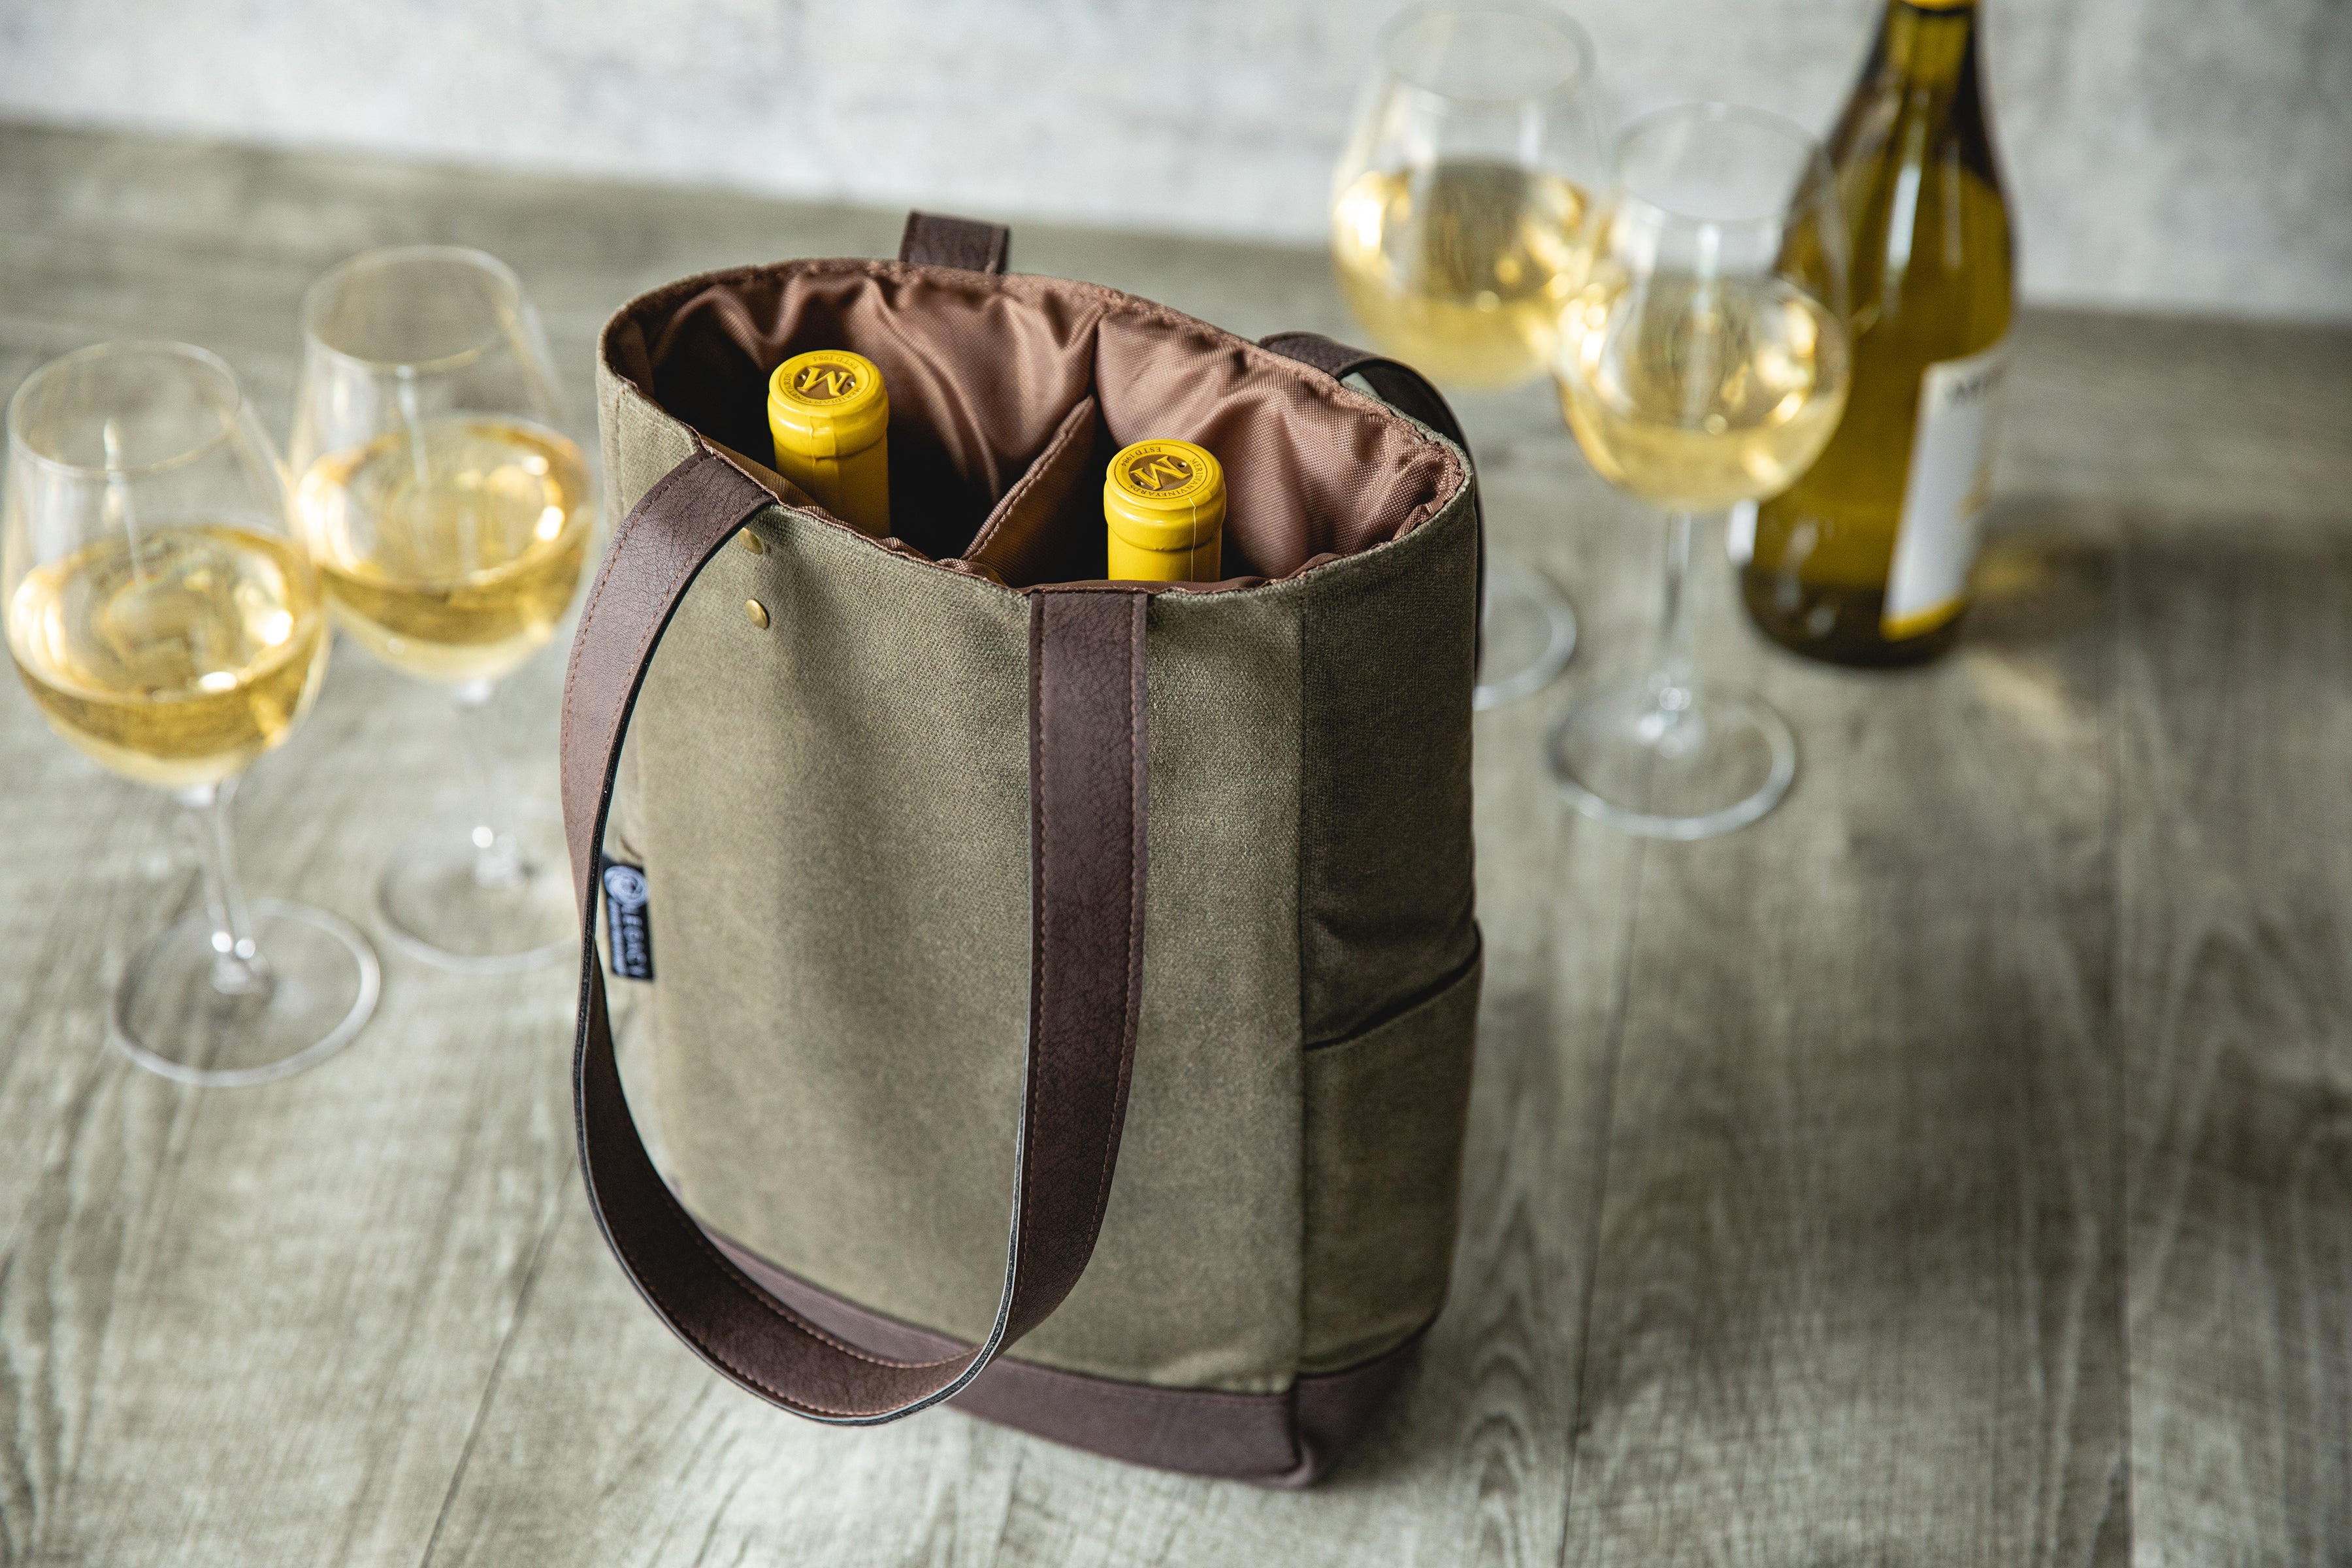 Pittsburgh Pirates - 2 Bottle Insulated Wine Cooler Bag